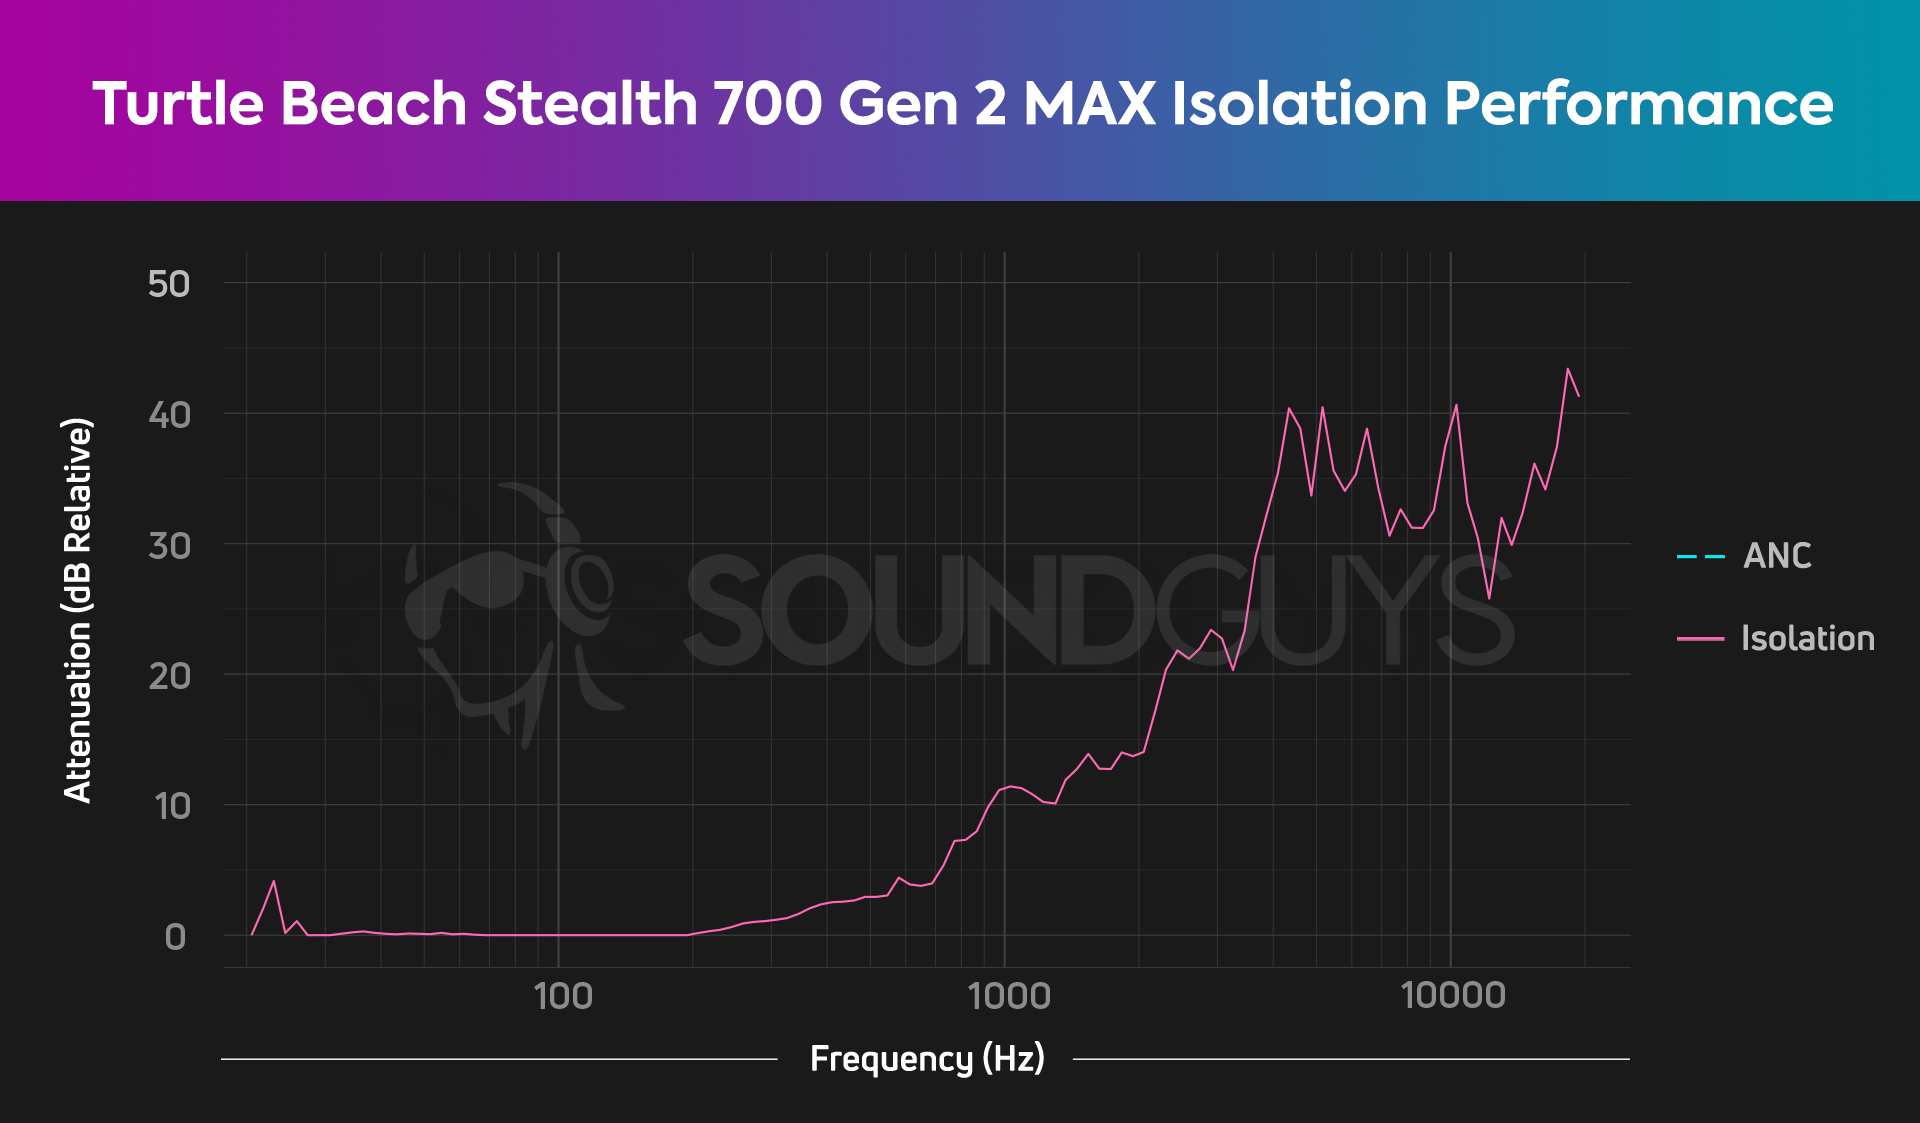 The isolation chart for the Turtle Beach Stealth 700 Gen 2 MAX showing fairly average isolation performance.